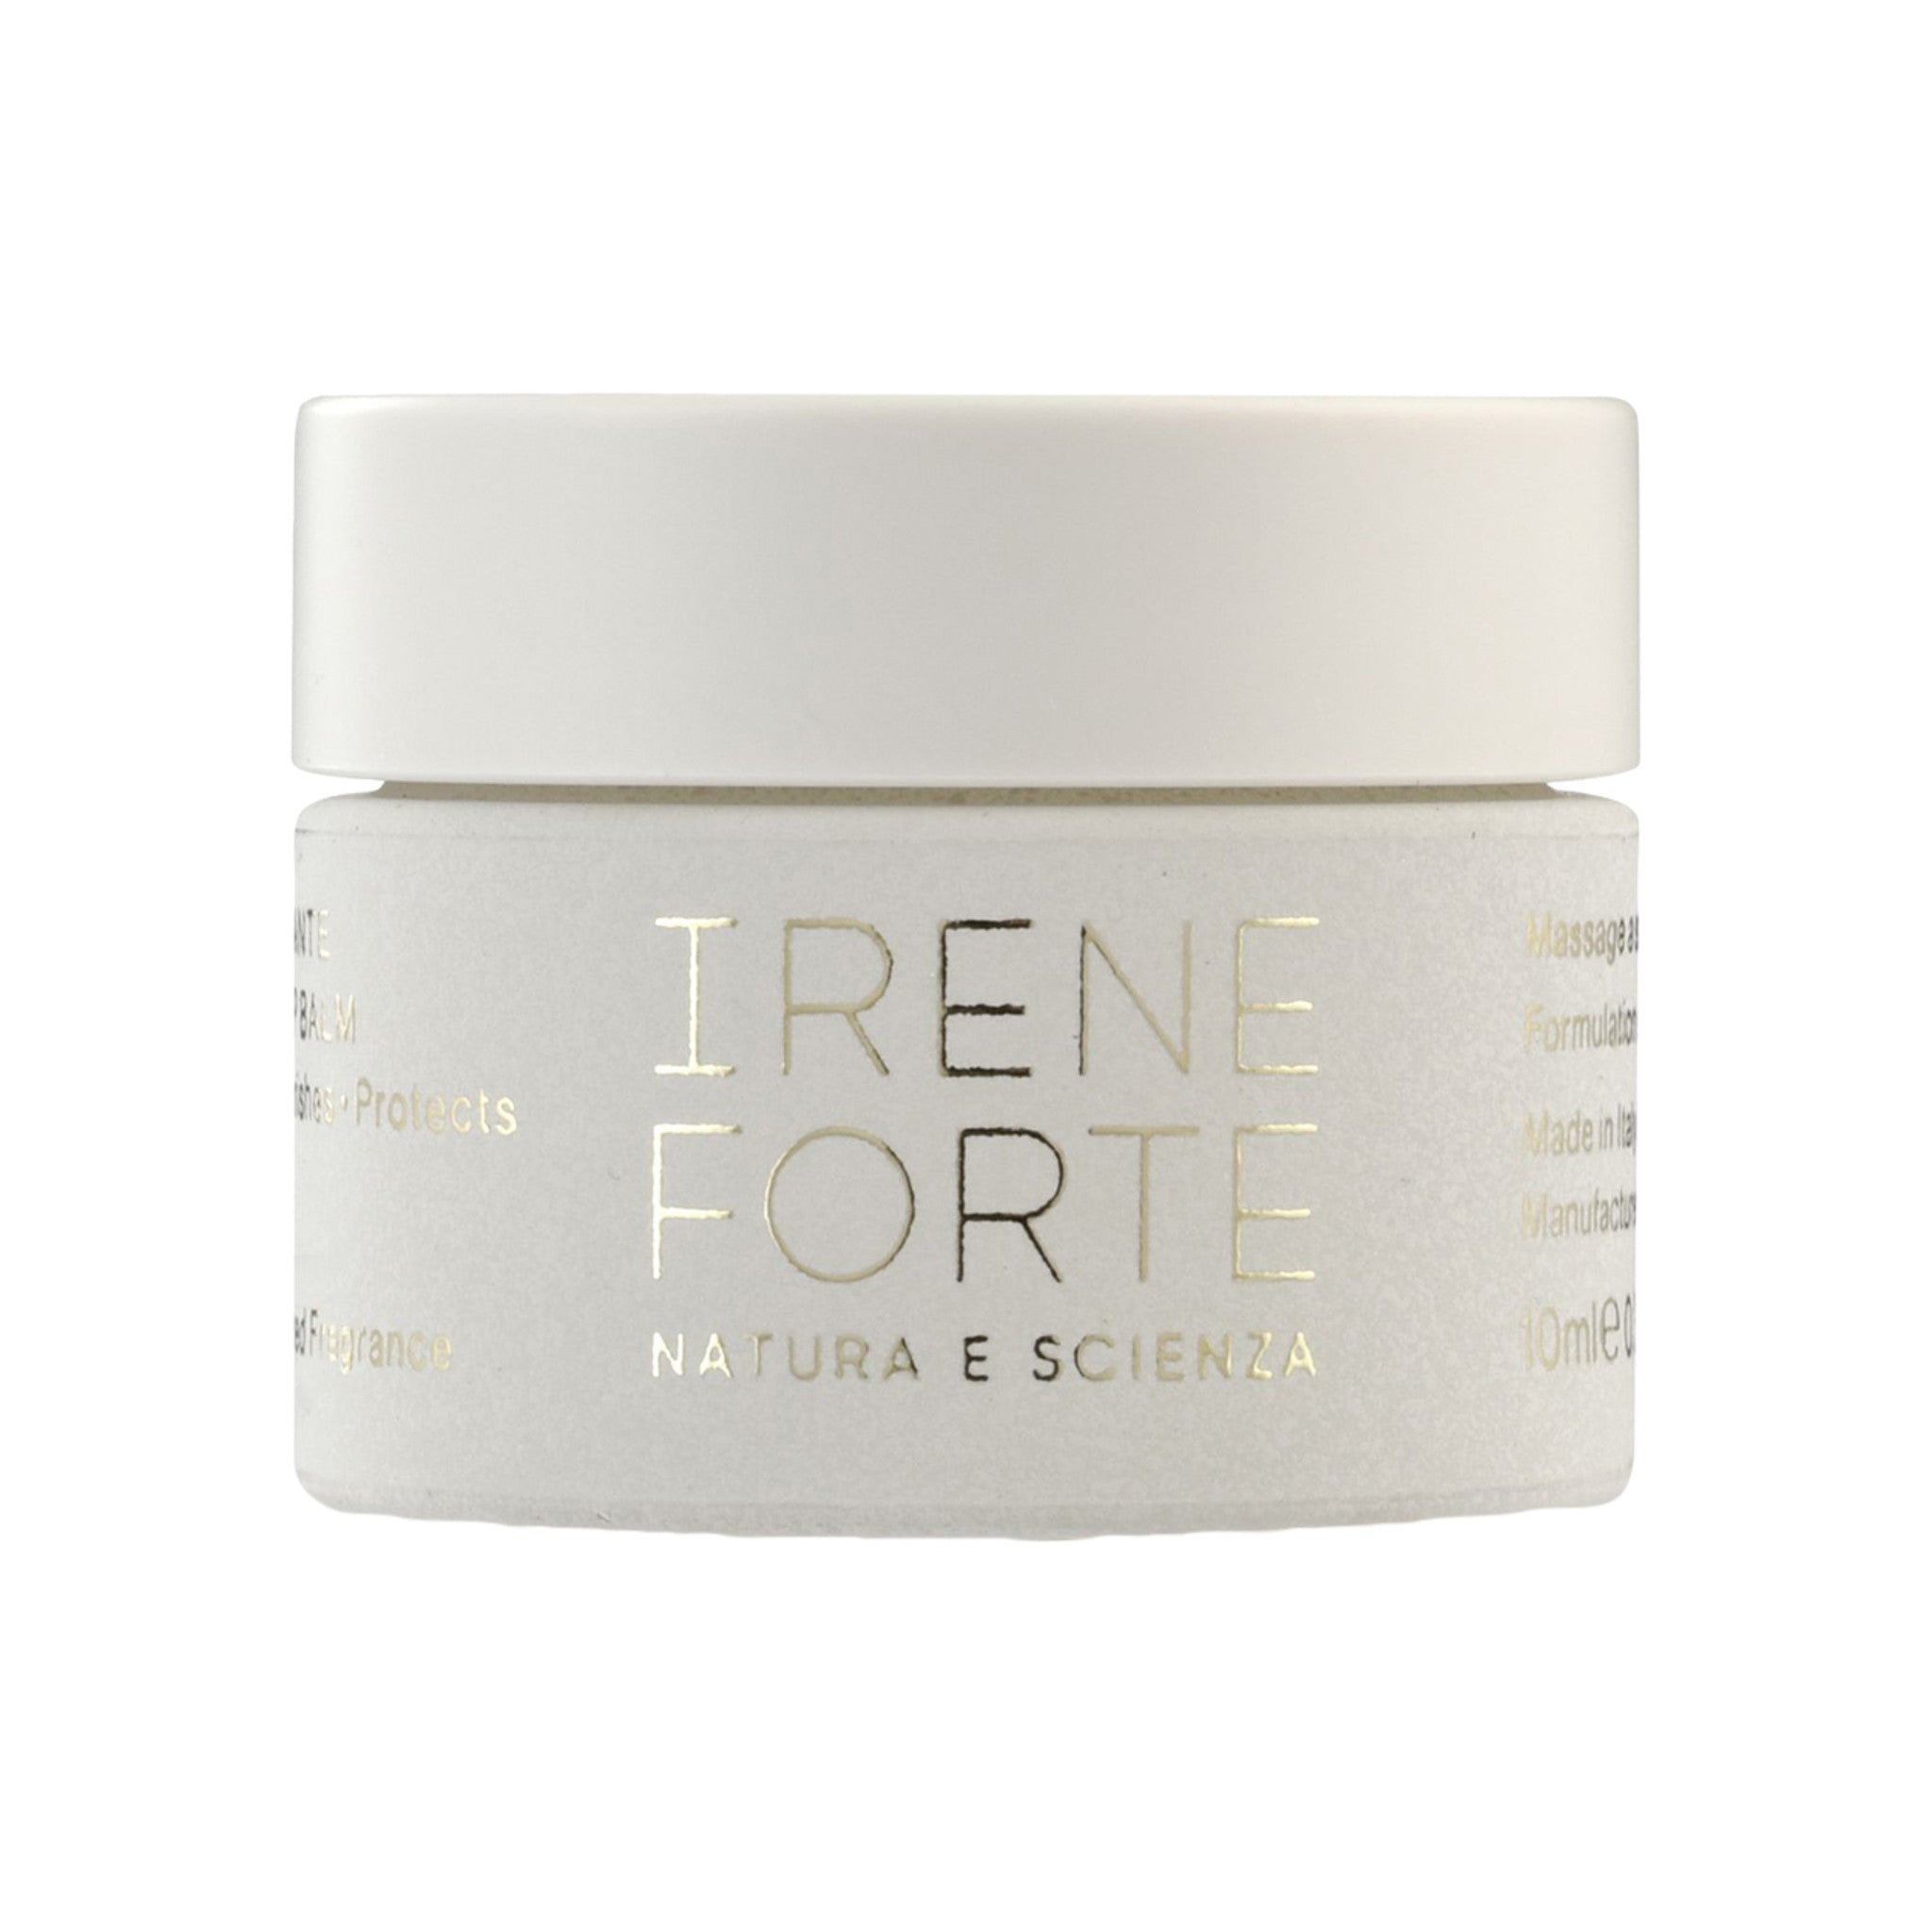 Irene Forte Pistachio Lip Balm main image. This product is in the color clear